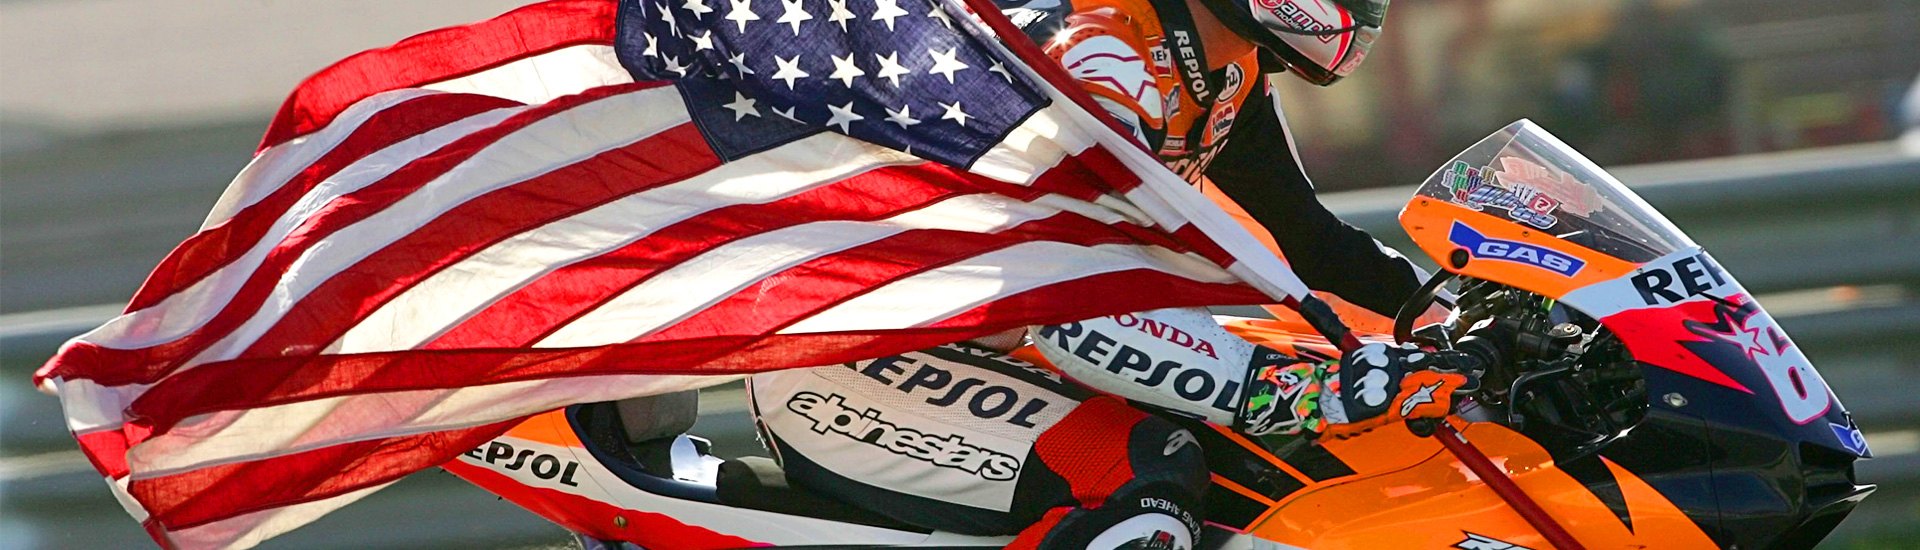 Universal Motorcycle Flags, Banners & Signs